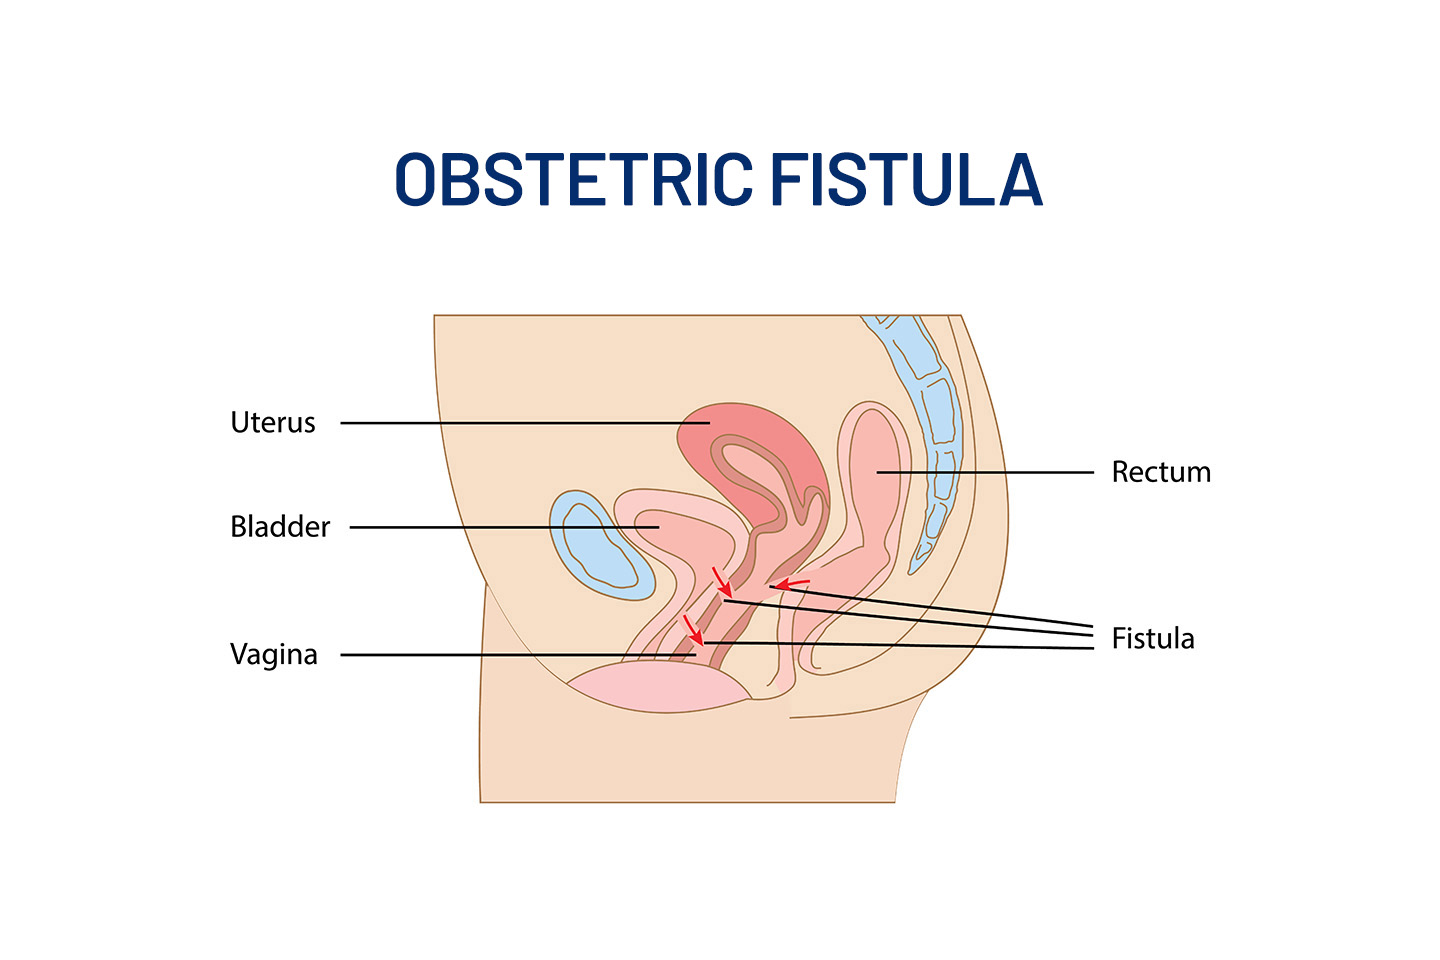 Symptoms of Obstetric Fistula and the New-Age Treatment Options Currently Available